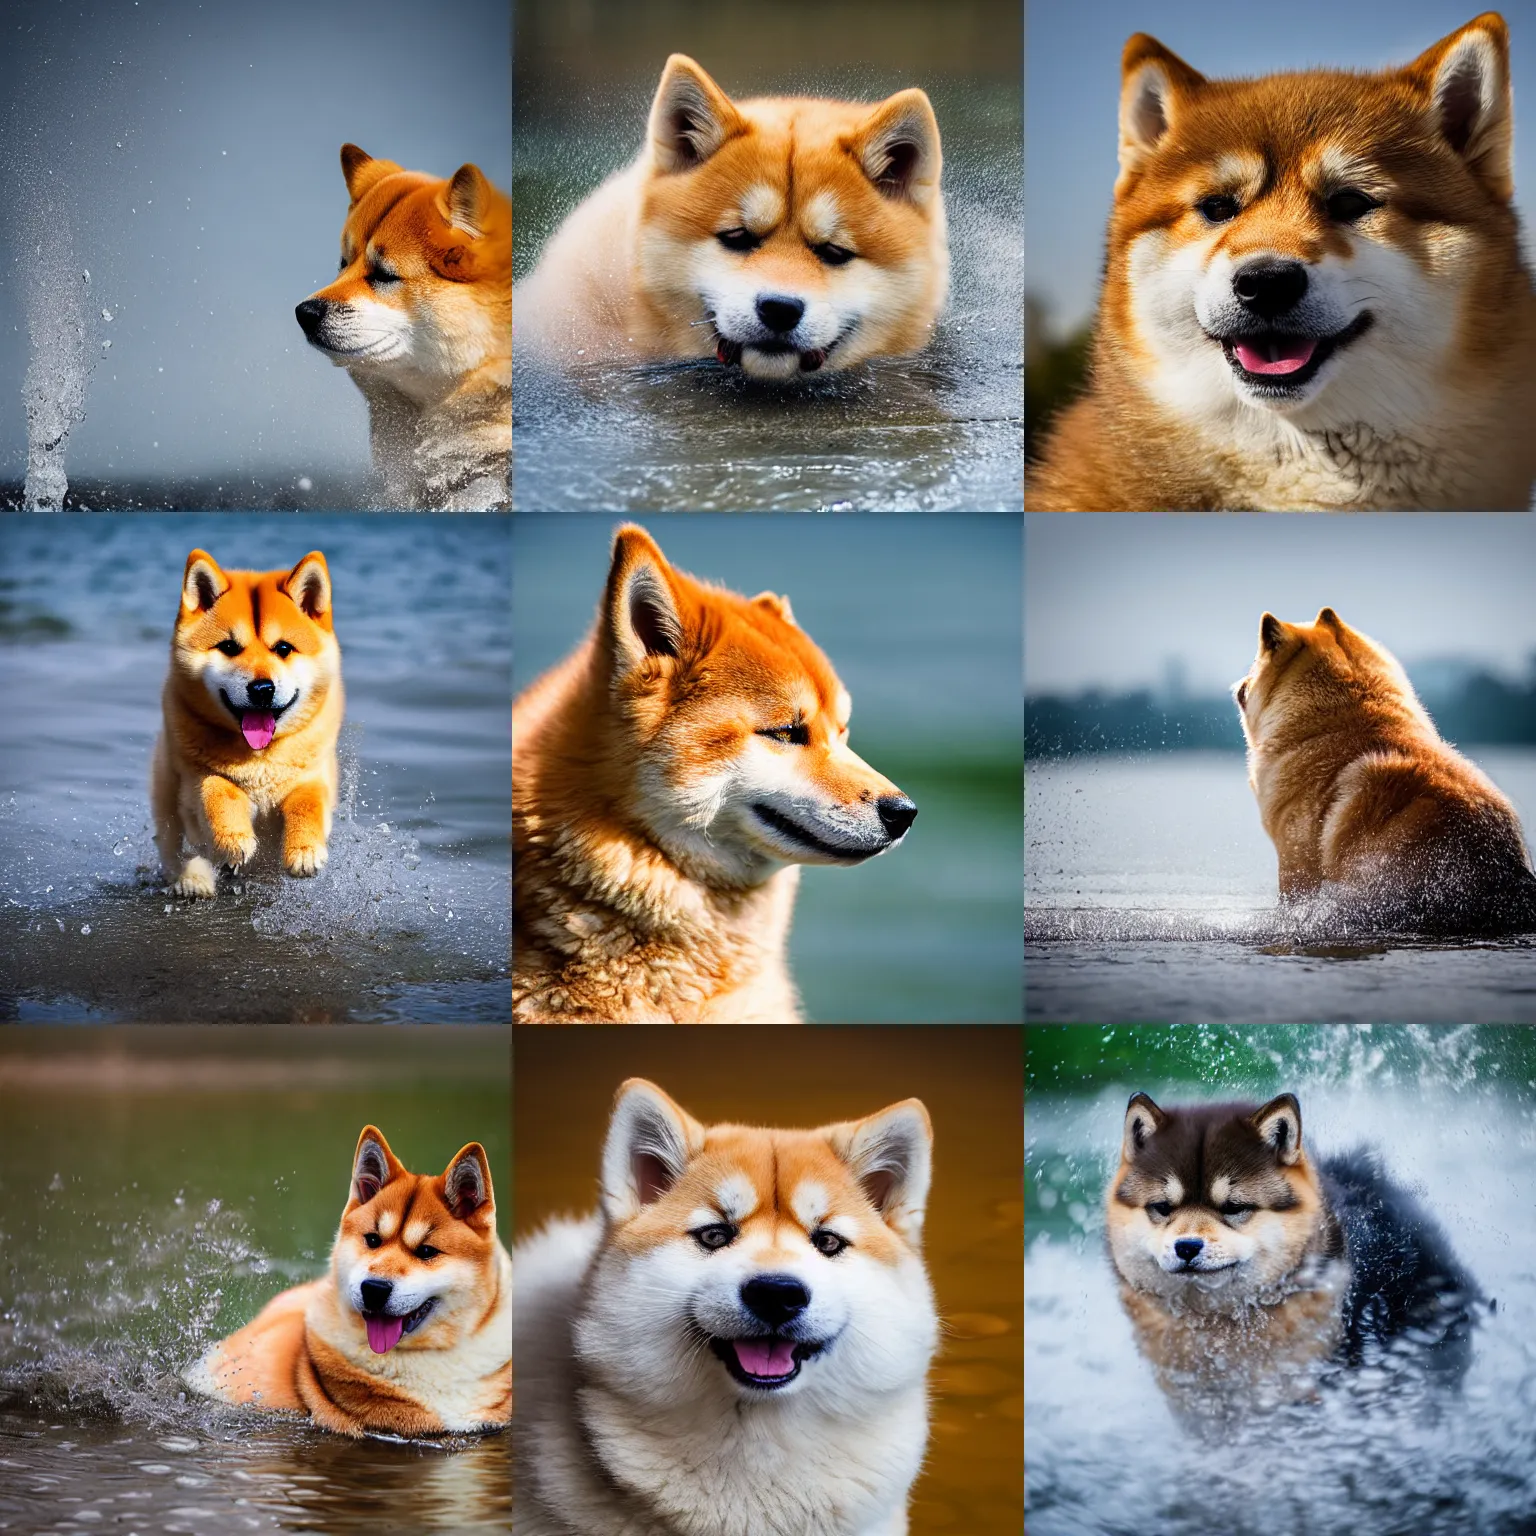 Prompt: Close up portrait of a big fluffy cat mixed with a shiba inu, award winning photograph, 50 mm lens and f/12.0, fast shutter speed of water floating in the air